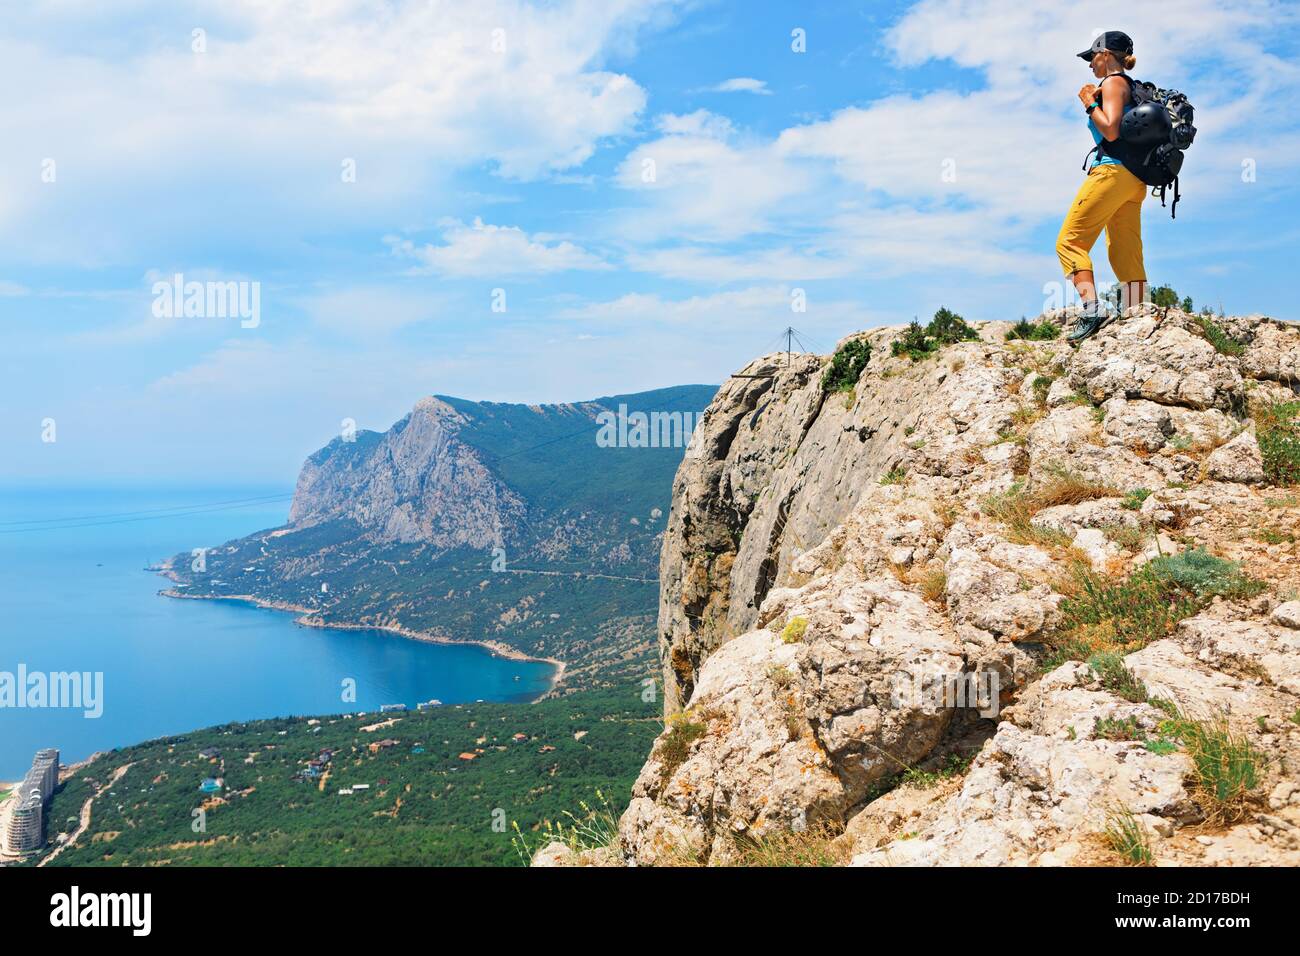 Young active woman stand on mount top. Look at amazing sea landscape. Family travel adventure, hiking activity, healthy lifestyle, exploring nature Stock Photo